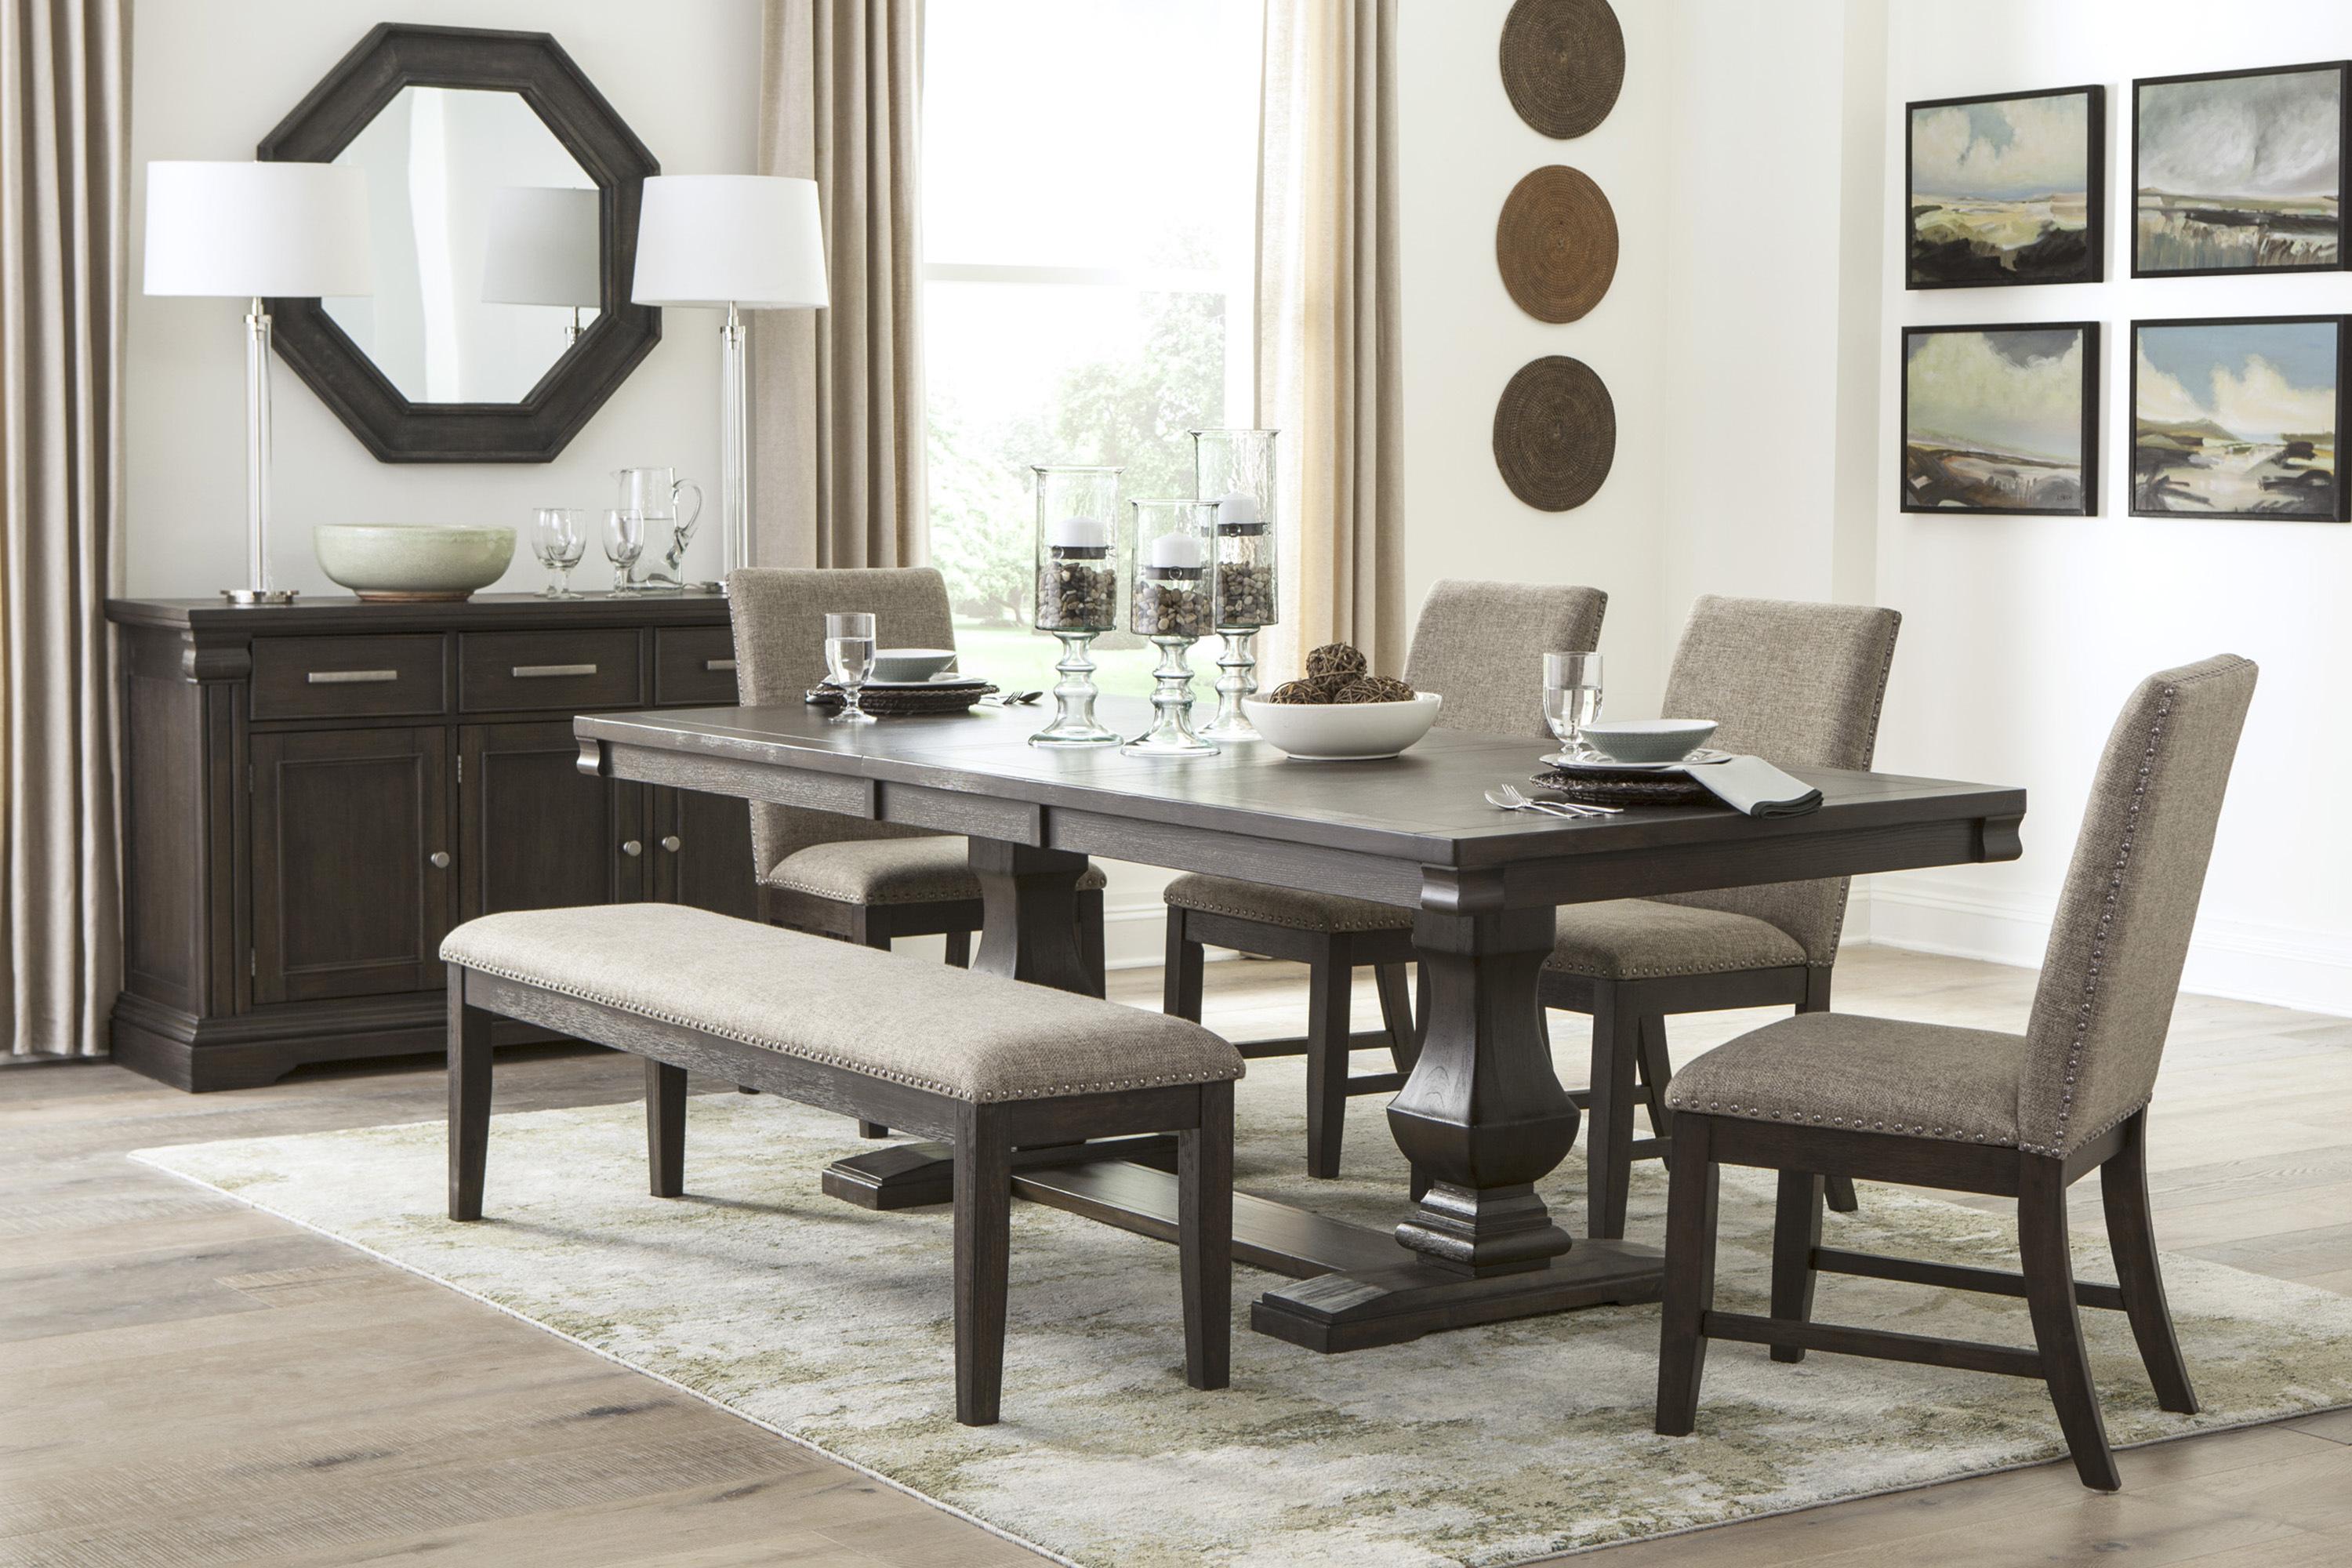 Traditional Dining Room Set 5741-94*8PC Southlake 5741-94*8PC in Rustic Brown Polyester